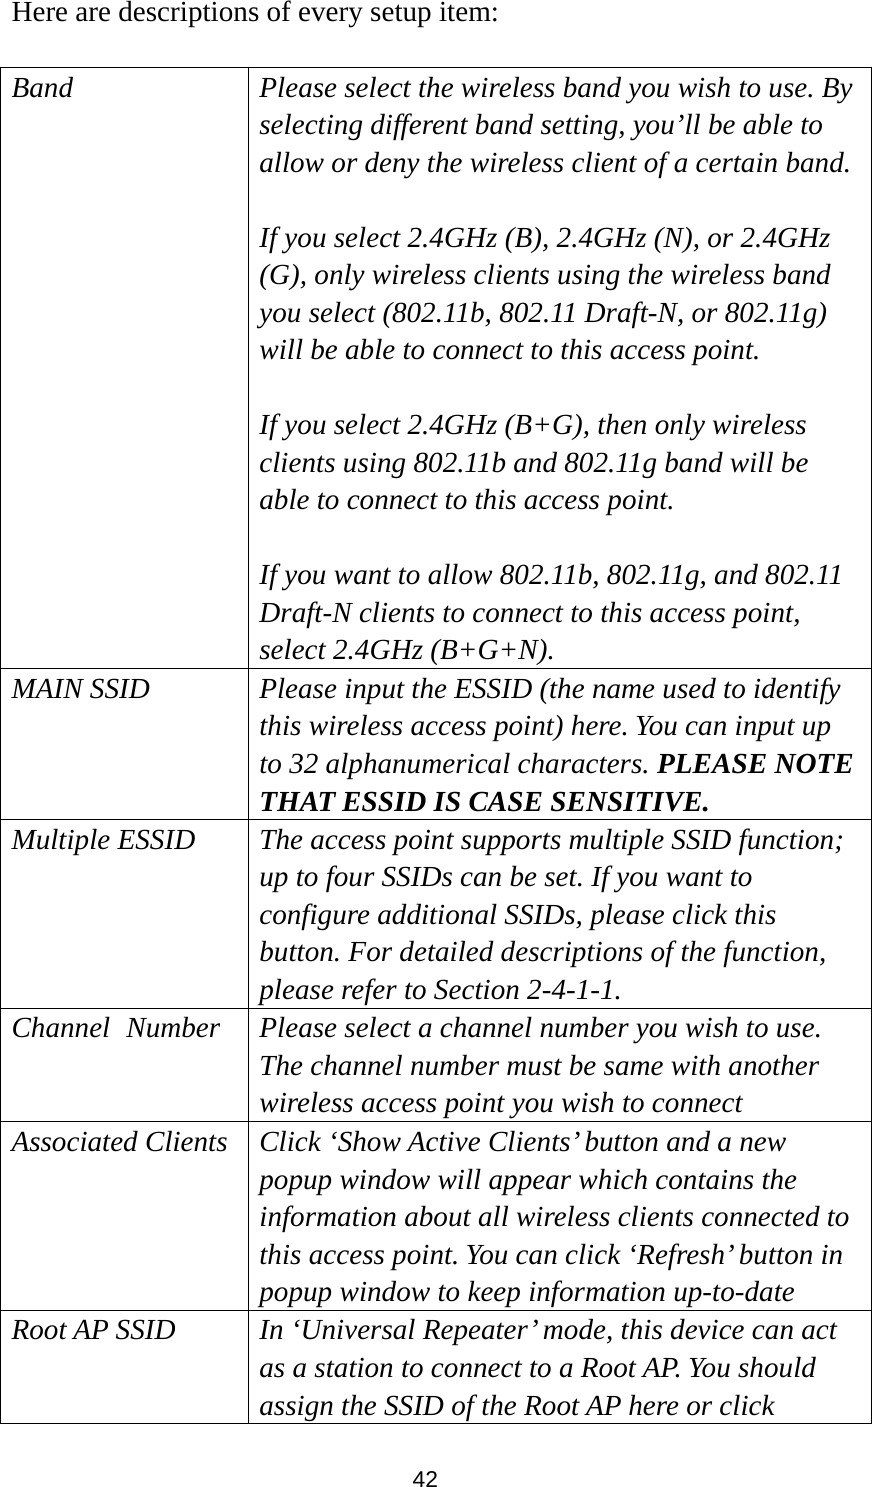 42 Here are descriptions of every setup item:  Band Please select the wireless band you wish to use. By selecting different band setting, you’ll be able to allow or deny the wireless client of a certain band.  If you select 2.4GHz (B), 2.4GHz (N), or 2.4GHz (G), only wireless clients using the wireless band you select (802.11b, 802.11 Draft-N, or 802.11g) will be able to connect to this access point.  If you select 2.4GHz (B+G), then only wireless clients using 802.11b and 802.11g band will be able to connect to this access point.    If you want to allow 802.11b, 802.11g, and 802.11 Draft-N clients to connect to this access point, select 2.4GHz (B+G+N). MAIN SSID  Please input the ESSID (the name used to identify this wireless access point) here. You can input up to 32 alphanumerical characters. PLEASE NOTE   THAT ESSID IS CASE SENSITIVE. Multiple ESSID  The access point supports multiple SSID function; up to four SSIDs can be set. If you want to configure additional SSIDs, please click this button. For detailed descriptions of the function, please refer to Section 2-4-1-1. Channel   Number Please select a channel number you wish to use. The channel number must be same with another wireless access point you wish to connect Associated Clients  Click ‘Show Active Clients’ button and a new popup window will appear which contains the information about all wireless clients connected to this access point. You can click ‘Refresh’ button in popup window to keep information up-to-date Root AP SSID In ‘Universal Repeater’ mode, this device can act as a station to connect to a Root AP. You should assign the SSID of the Root AP here or click 